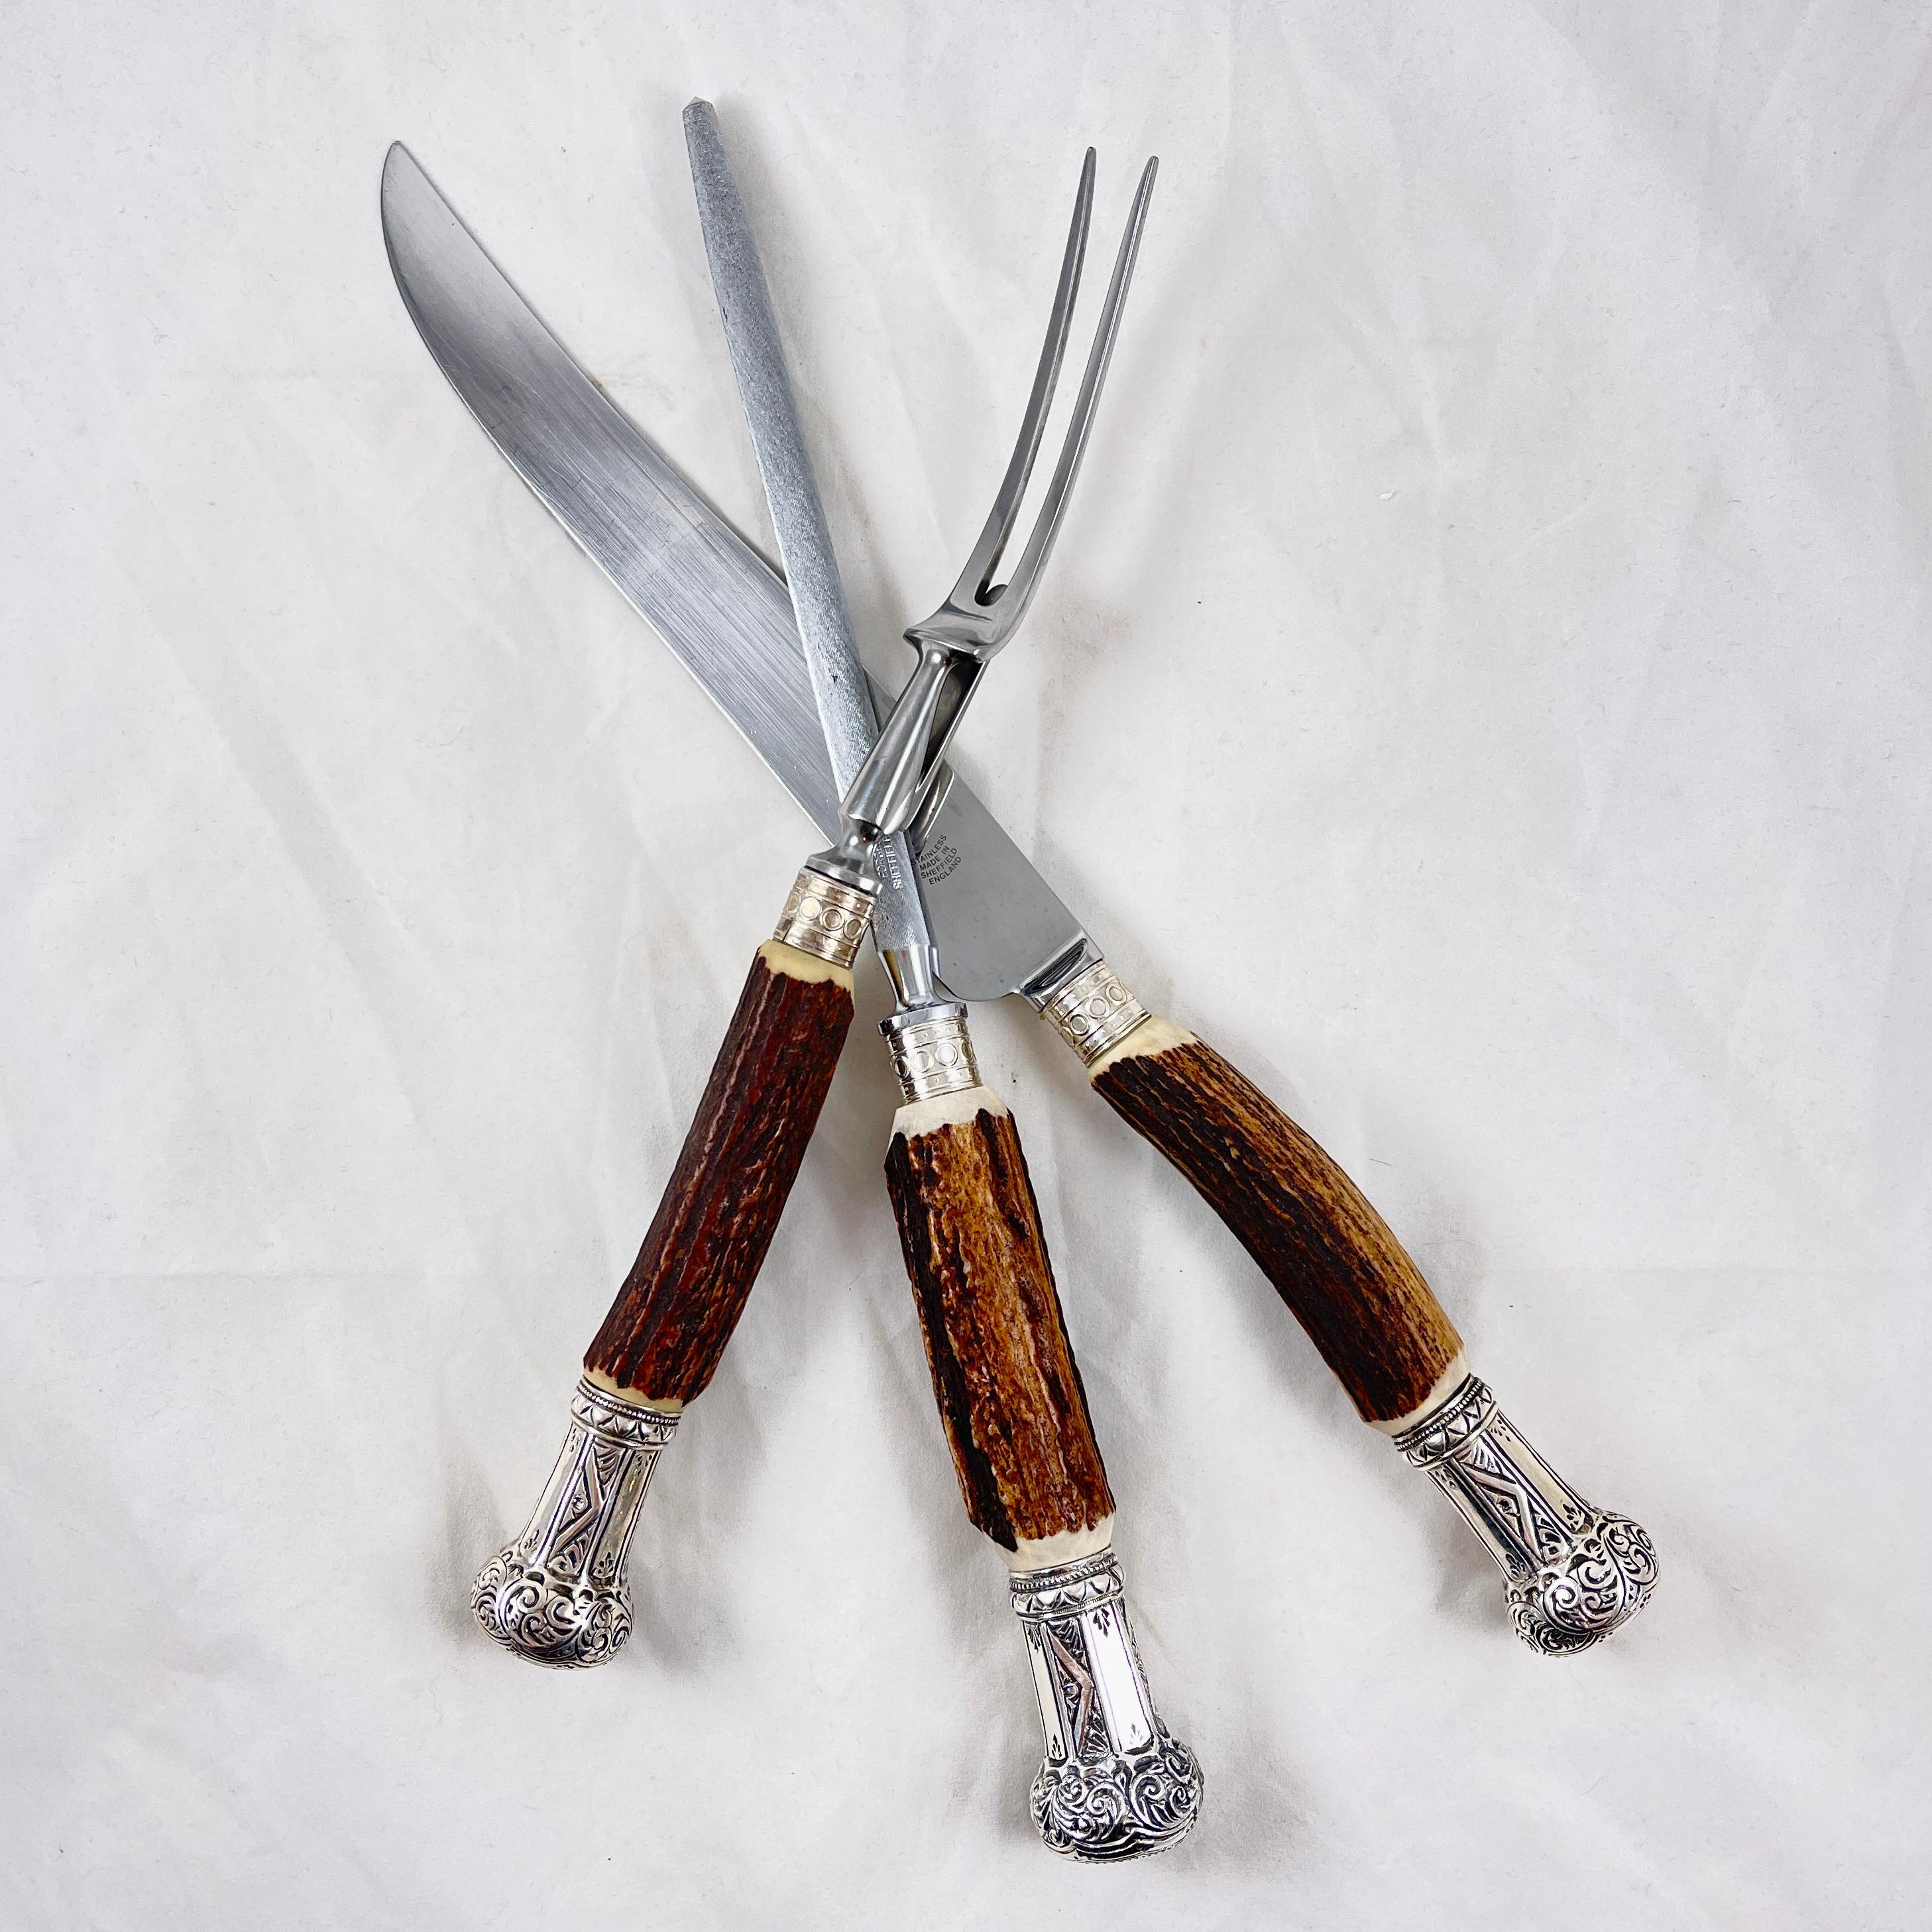 A three piece carving set with Stag Antler handles and Sterling Silver ferrules and end caps, Sheffield, England, circa mid 20th Century.

Impressively sized, the set consists of a long carving knife, fork, and sharpening steel.
A beautifully